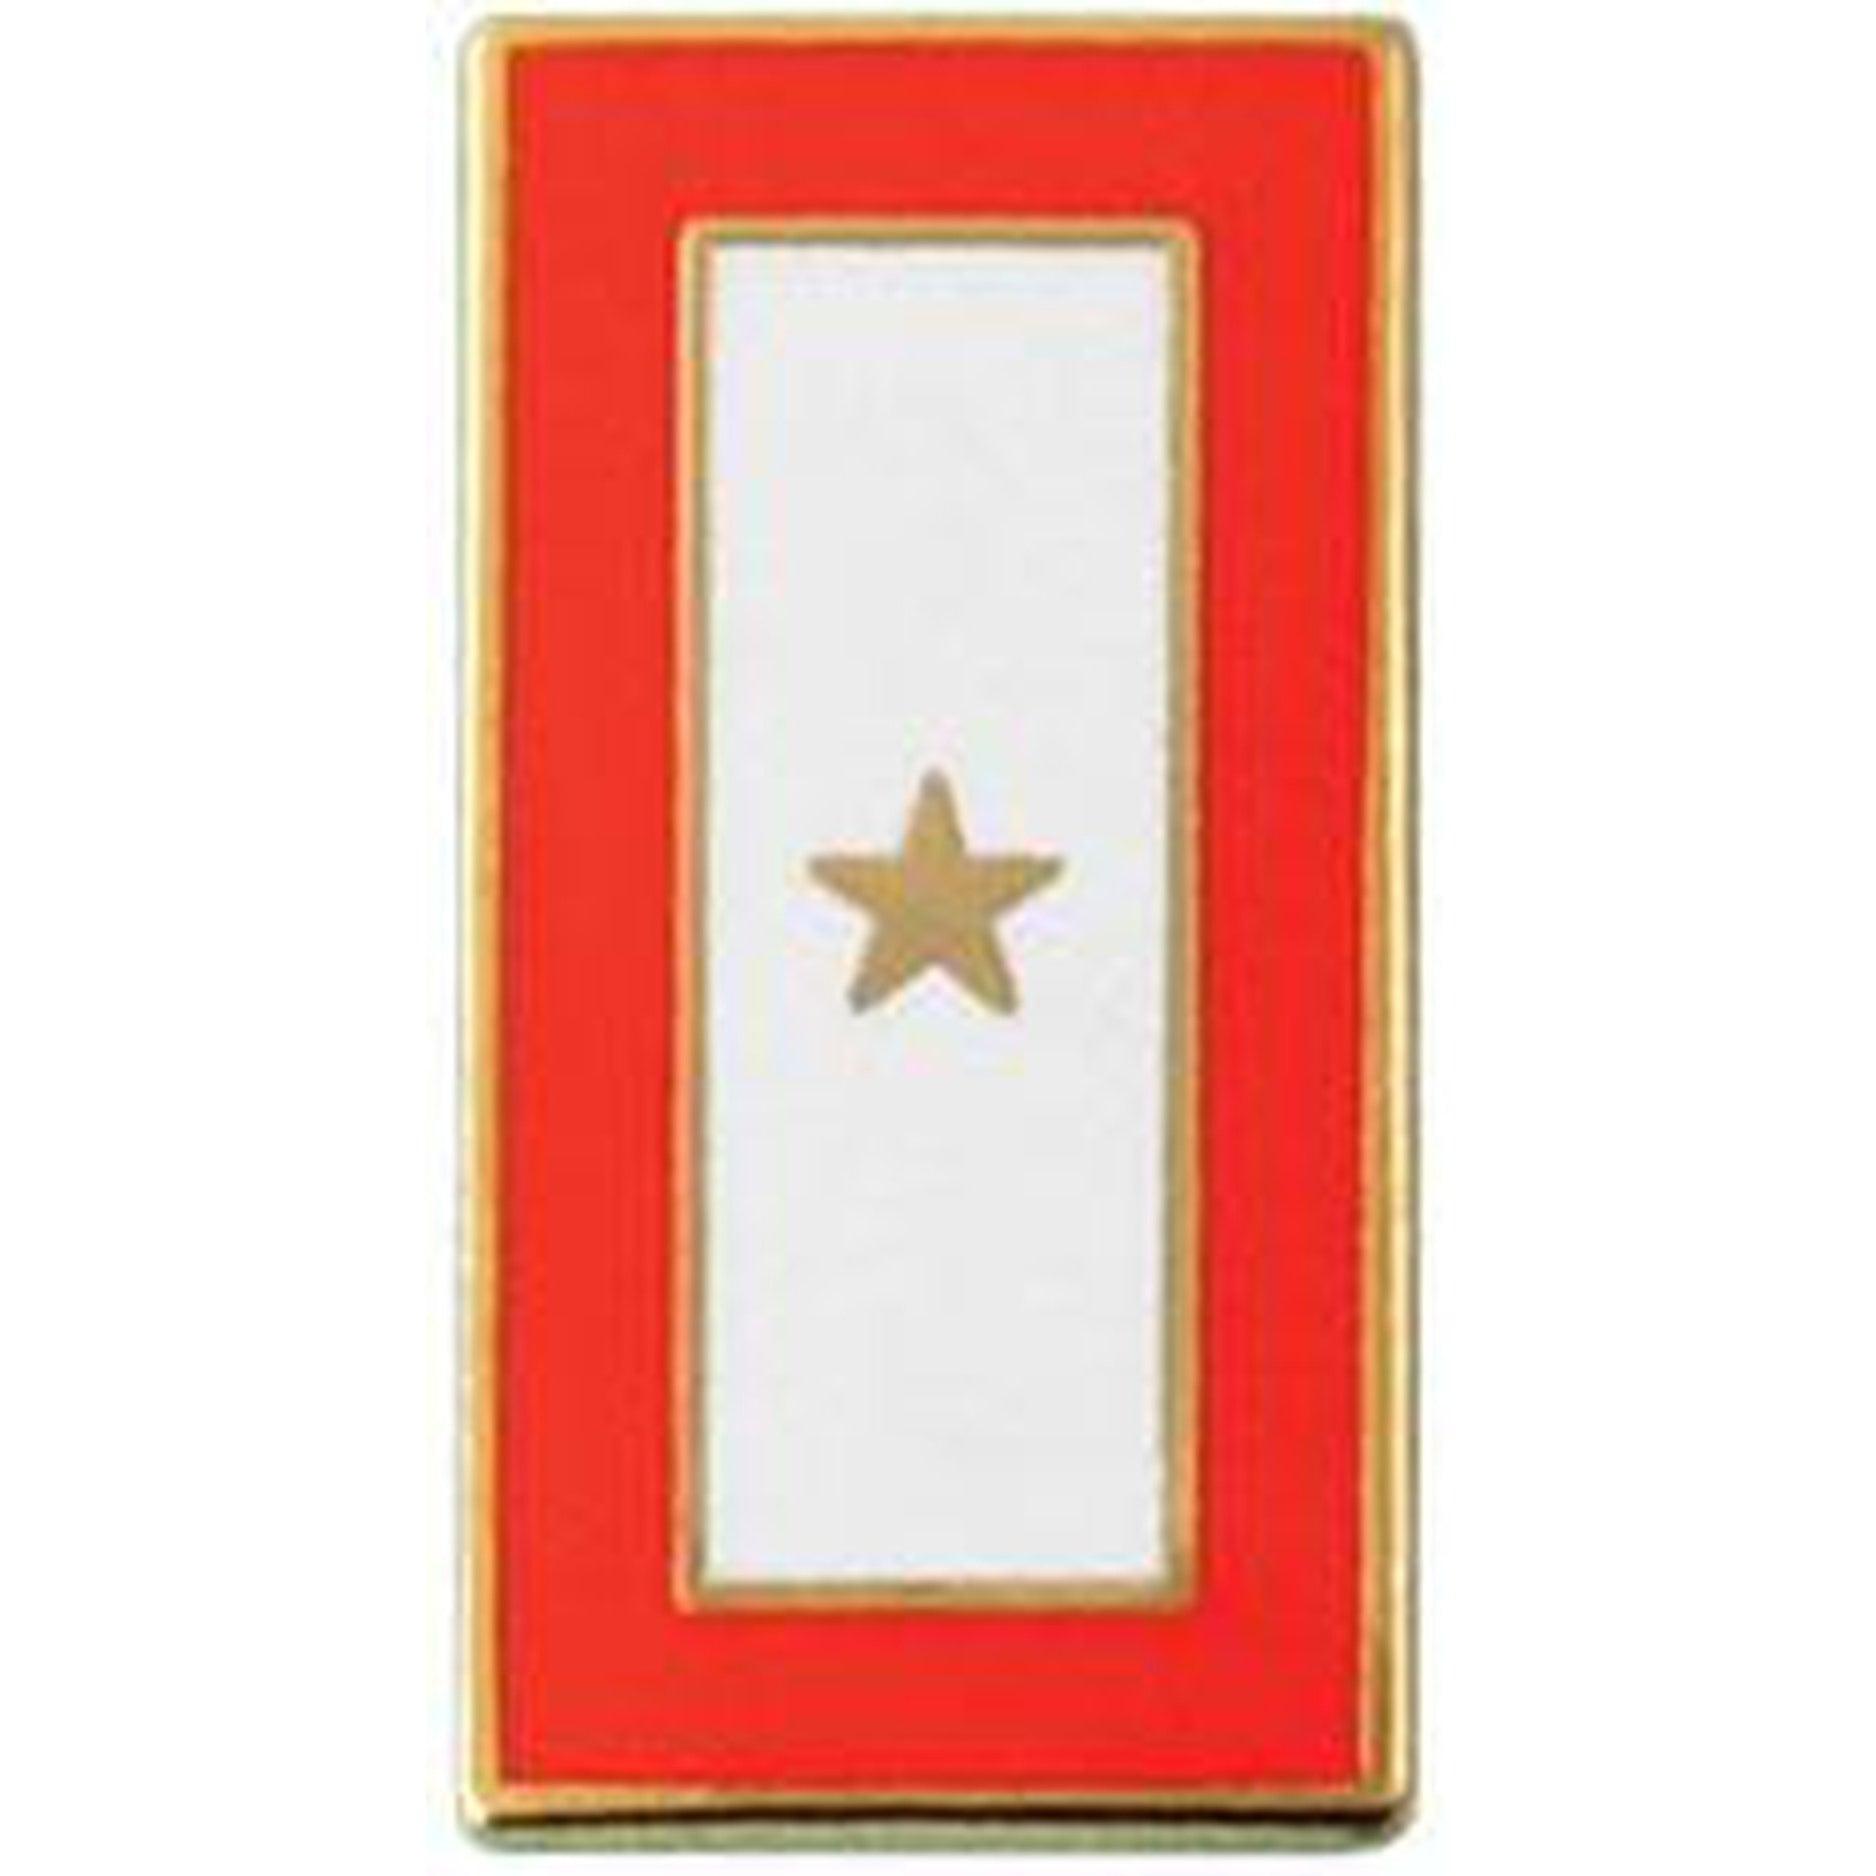 Gold Star Service on 7/8" Lapel Pin - Military Republic